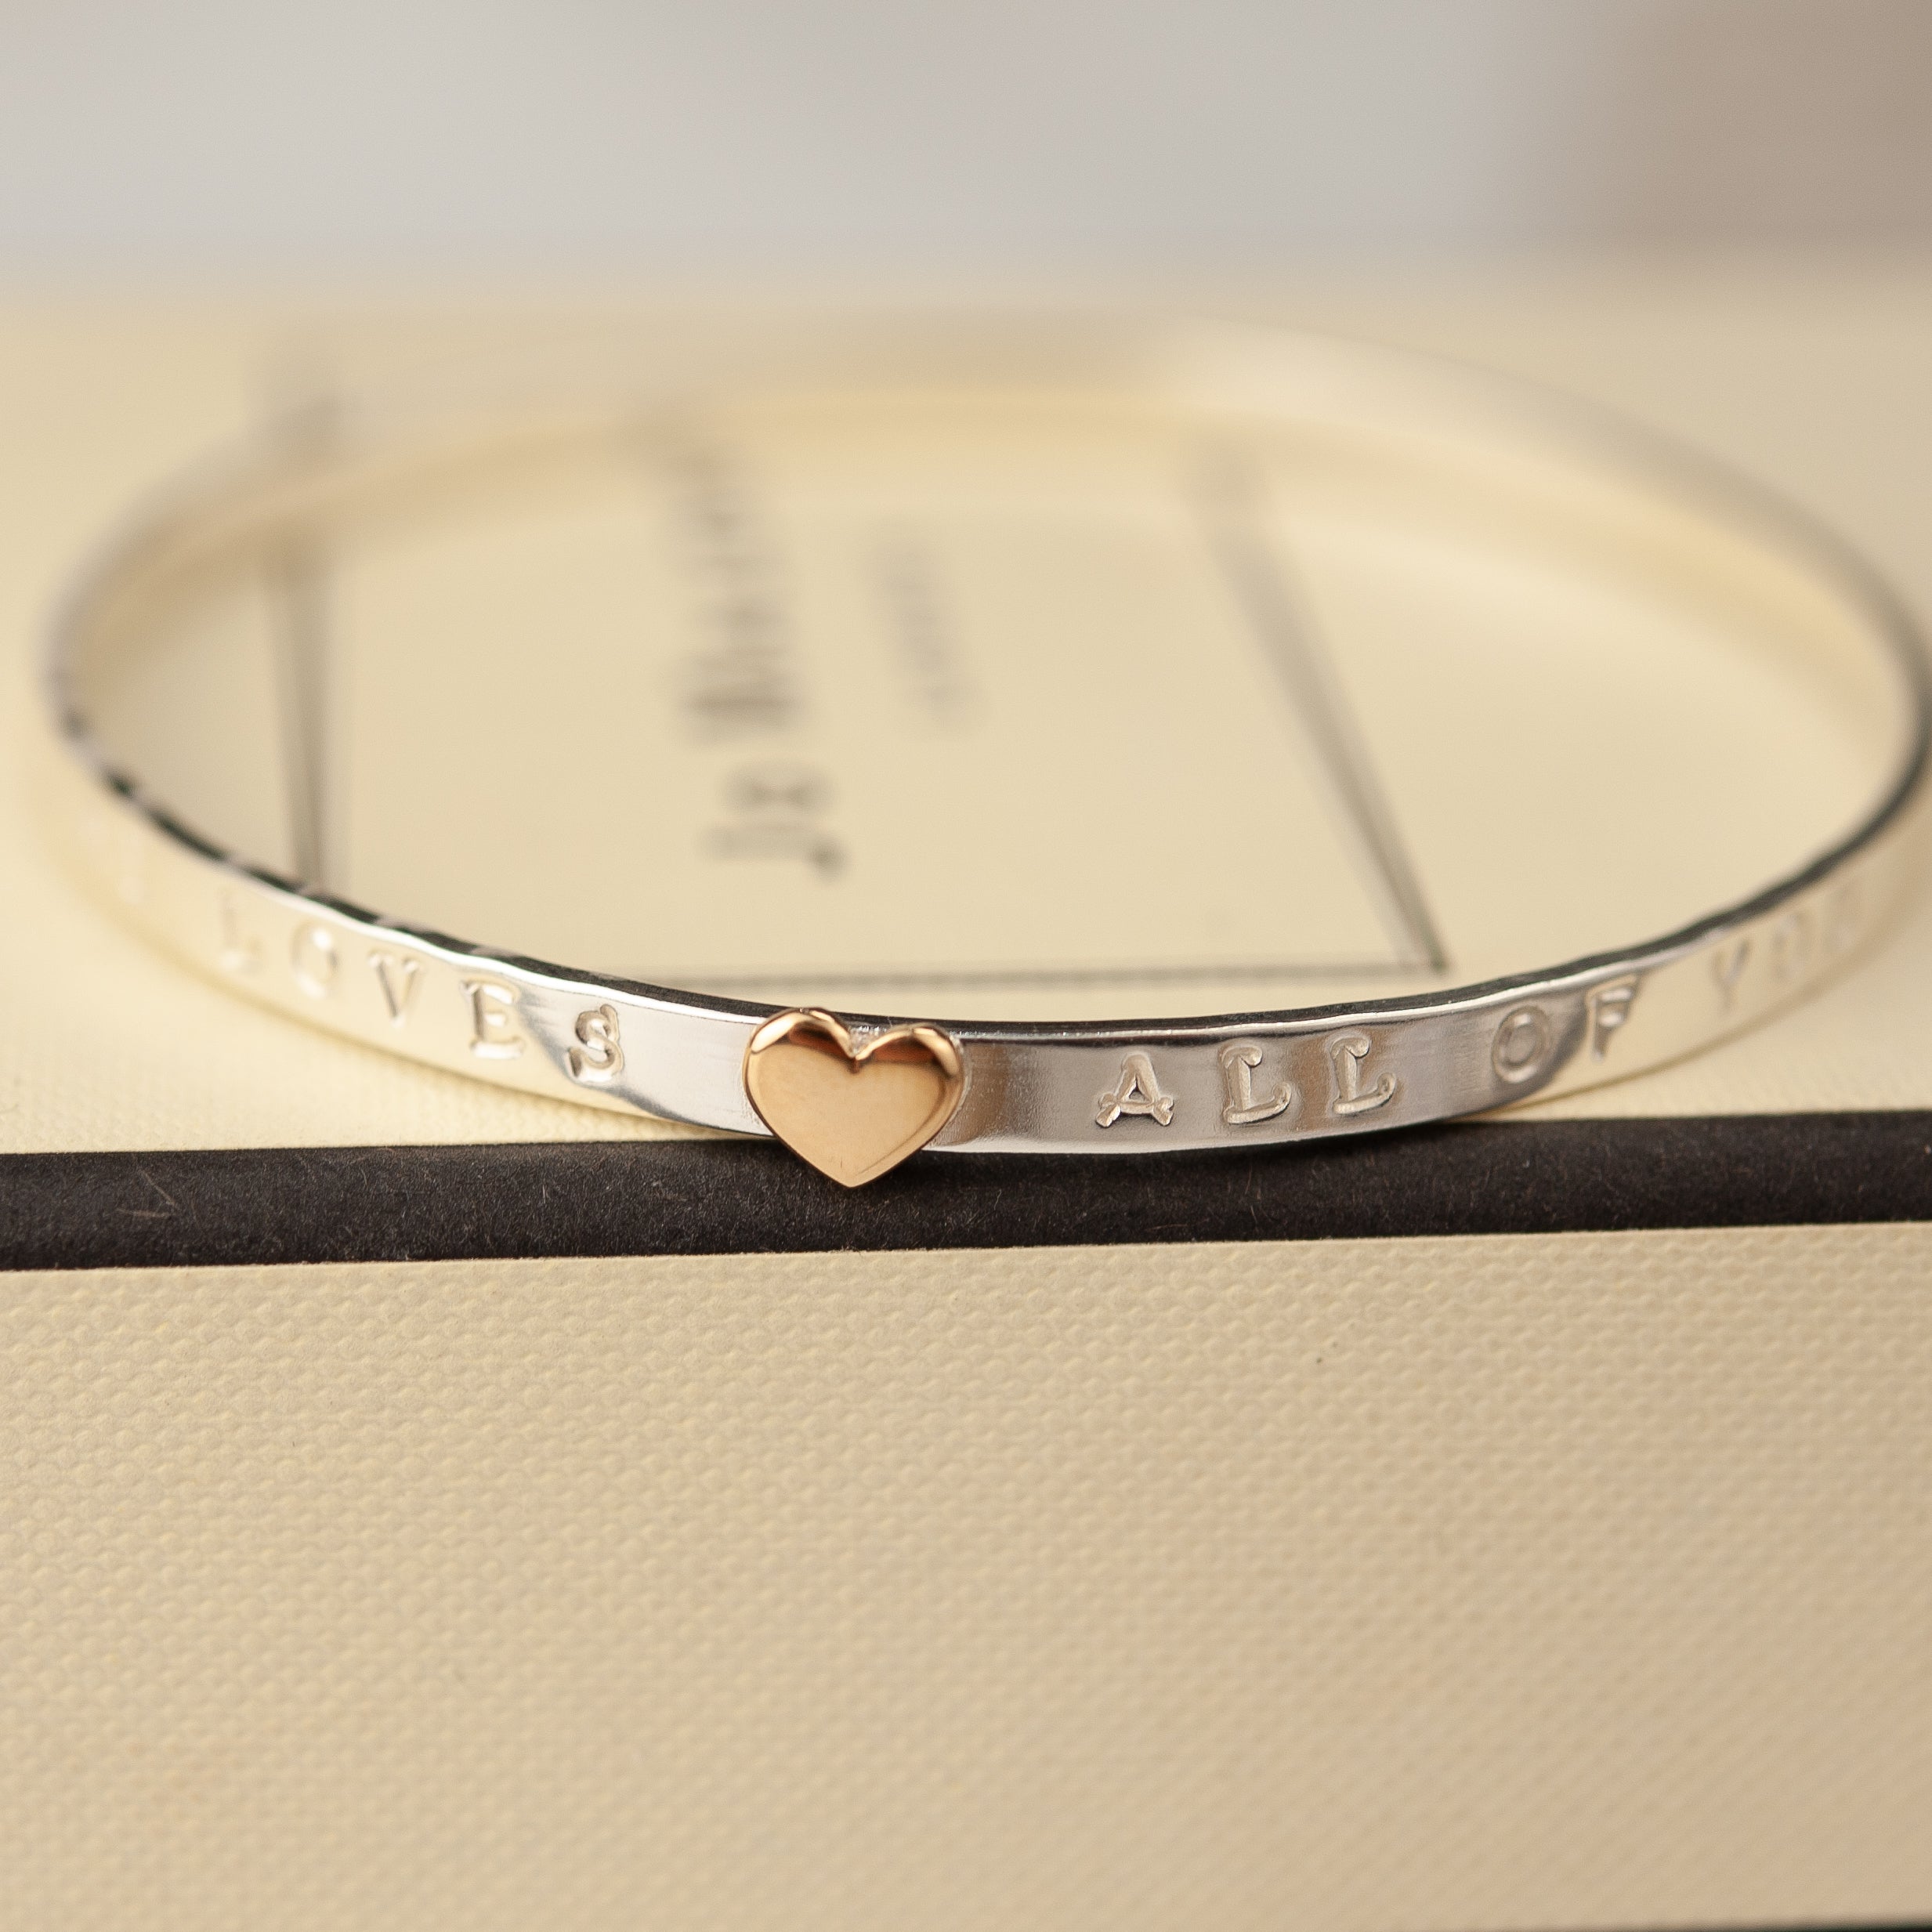 Belle & Bee Message bangle gold heart